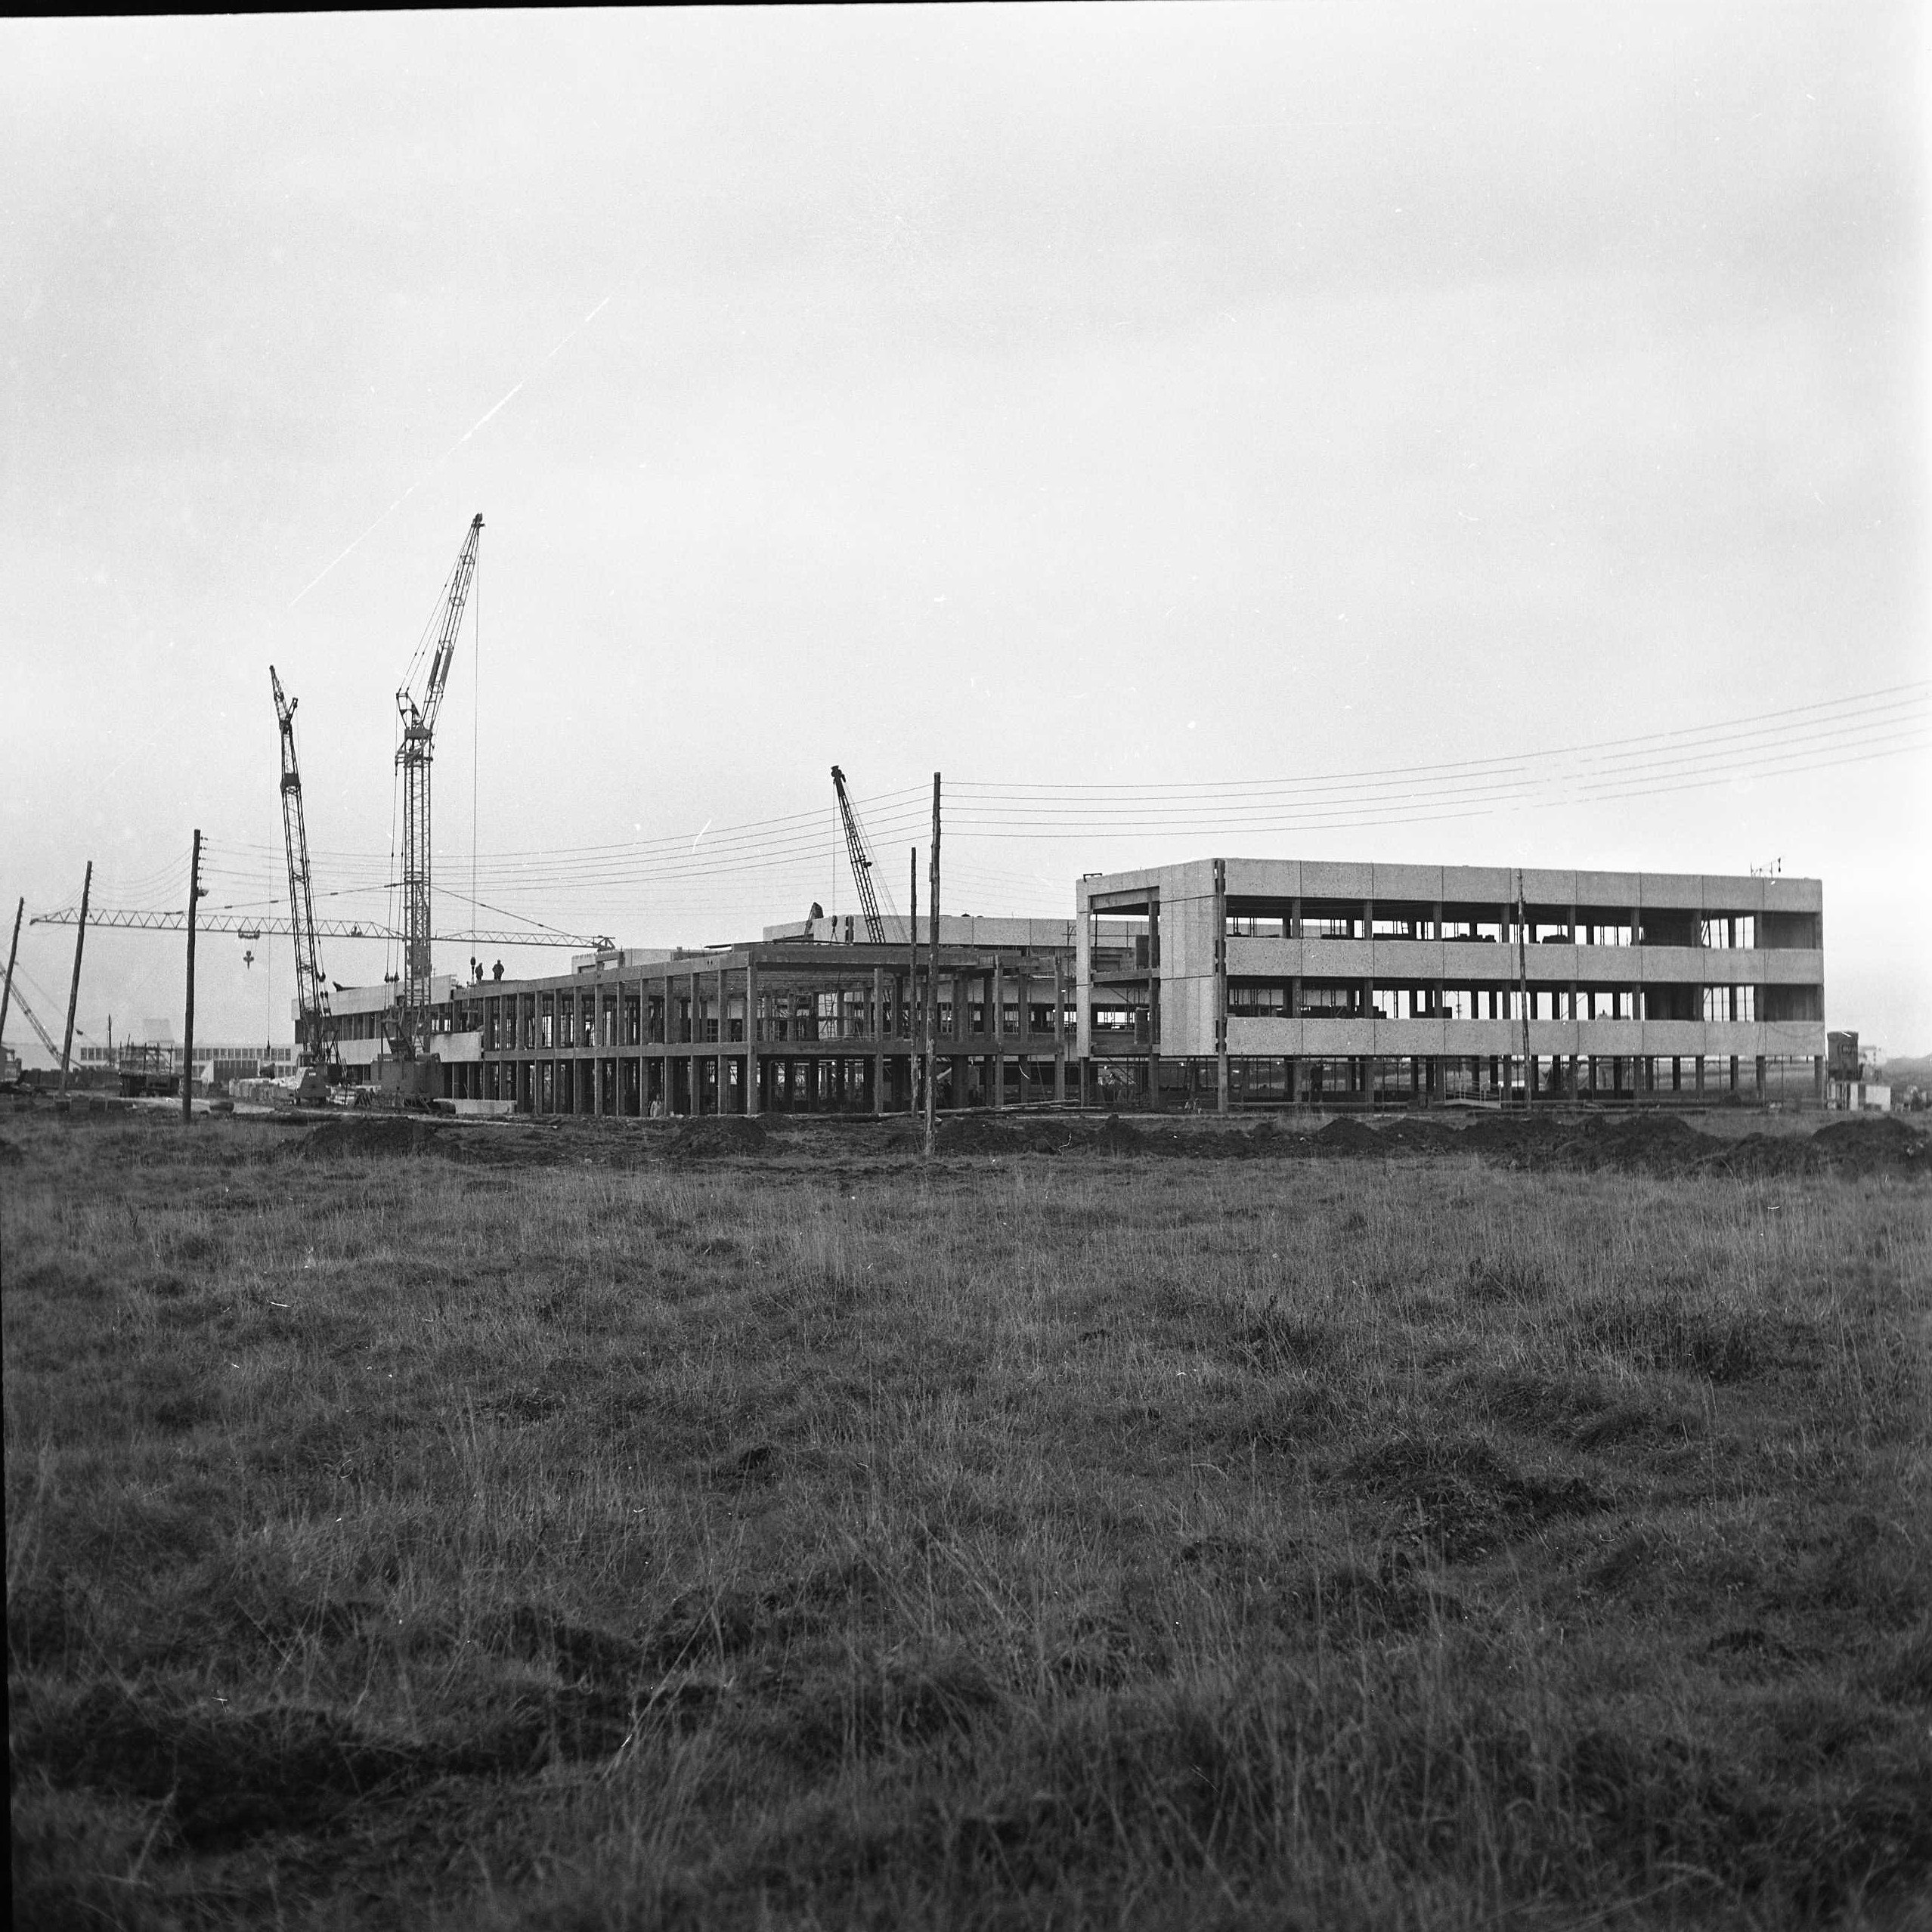 Construction of the Library